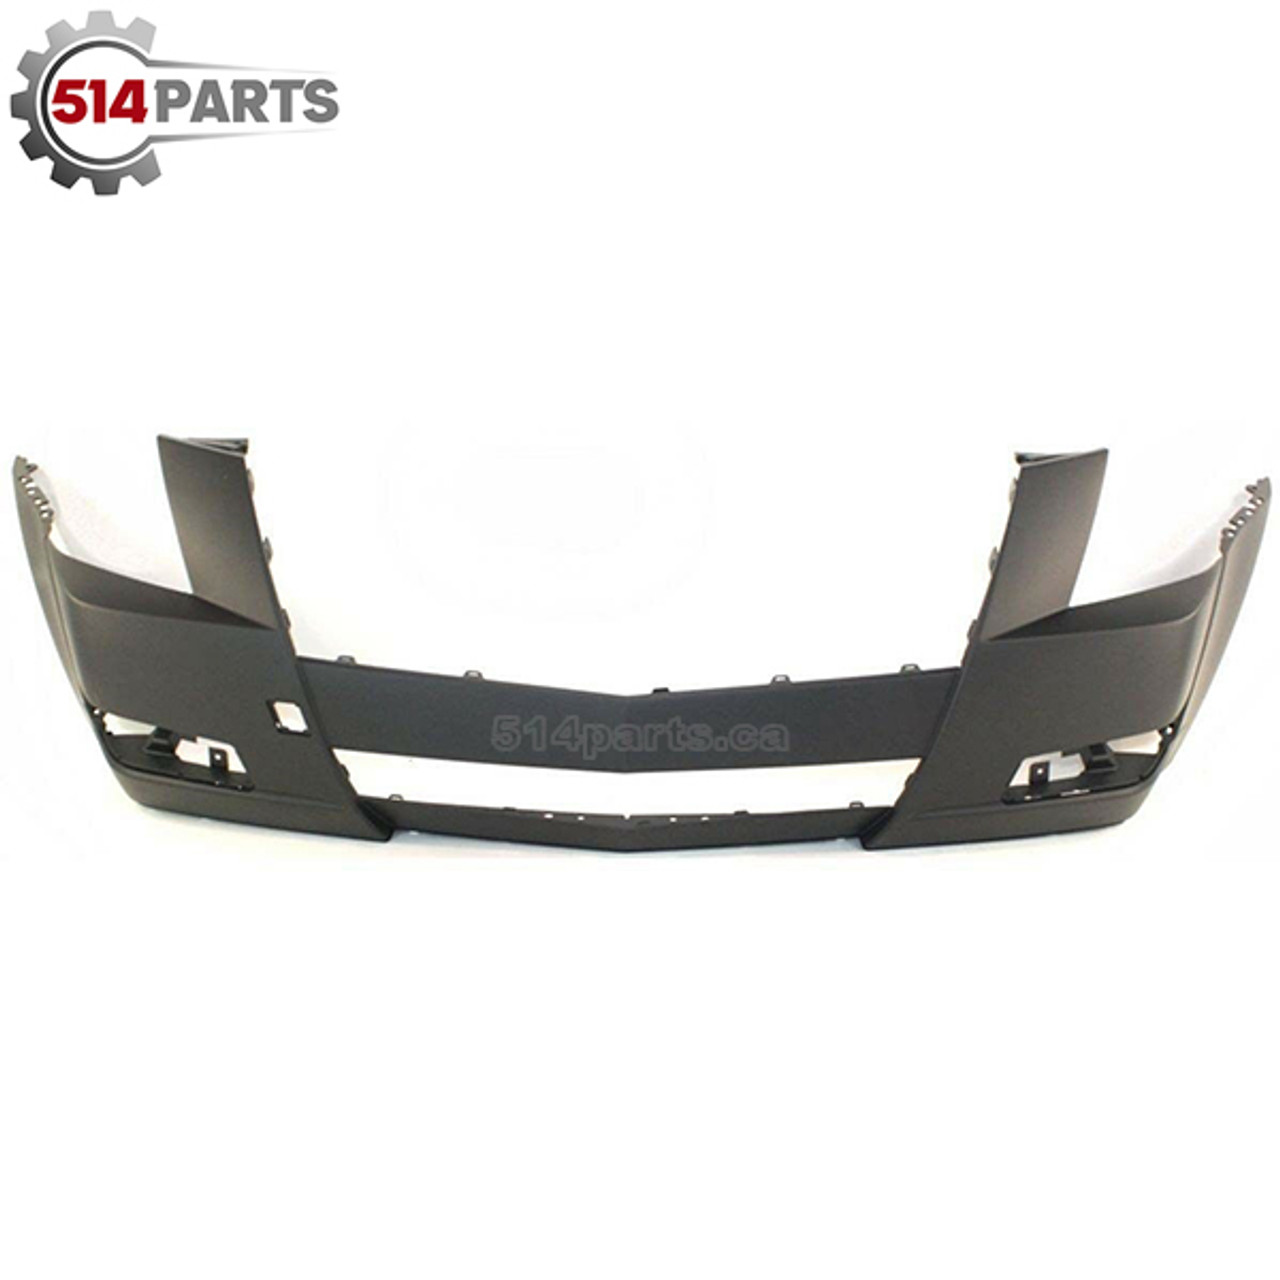 2008 - 2014 CADILLAC CTS FRONT BUMPER COVER NO HID NO HEAD LIGHTS WASHER - PARE-CHOC AVANT NO HID NO LAVE PHARES